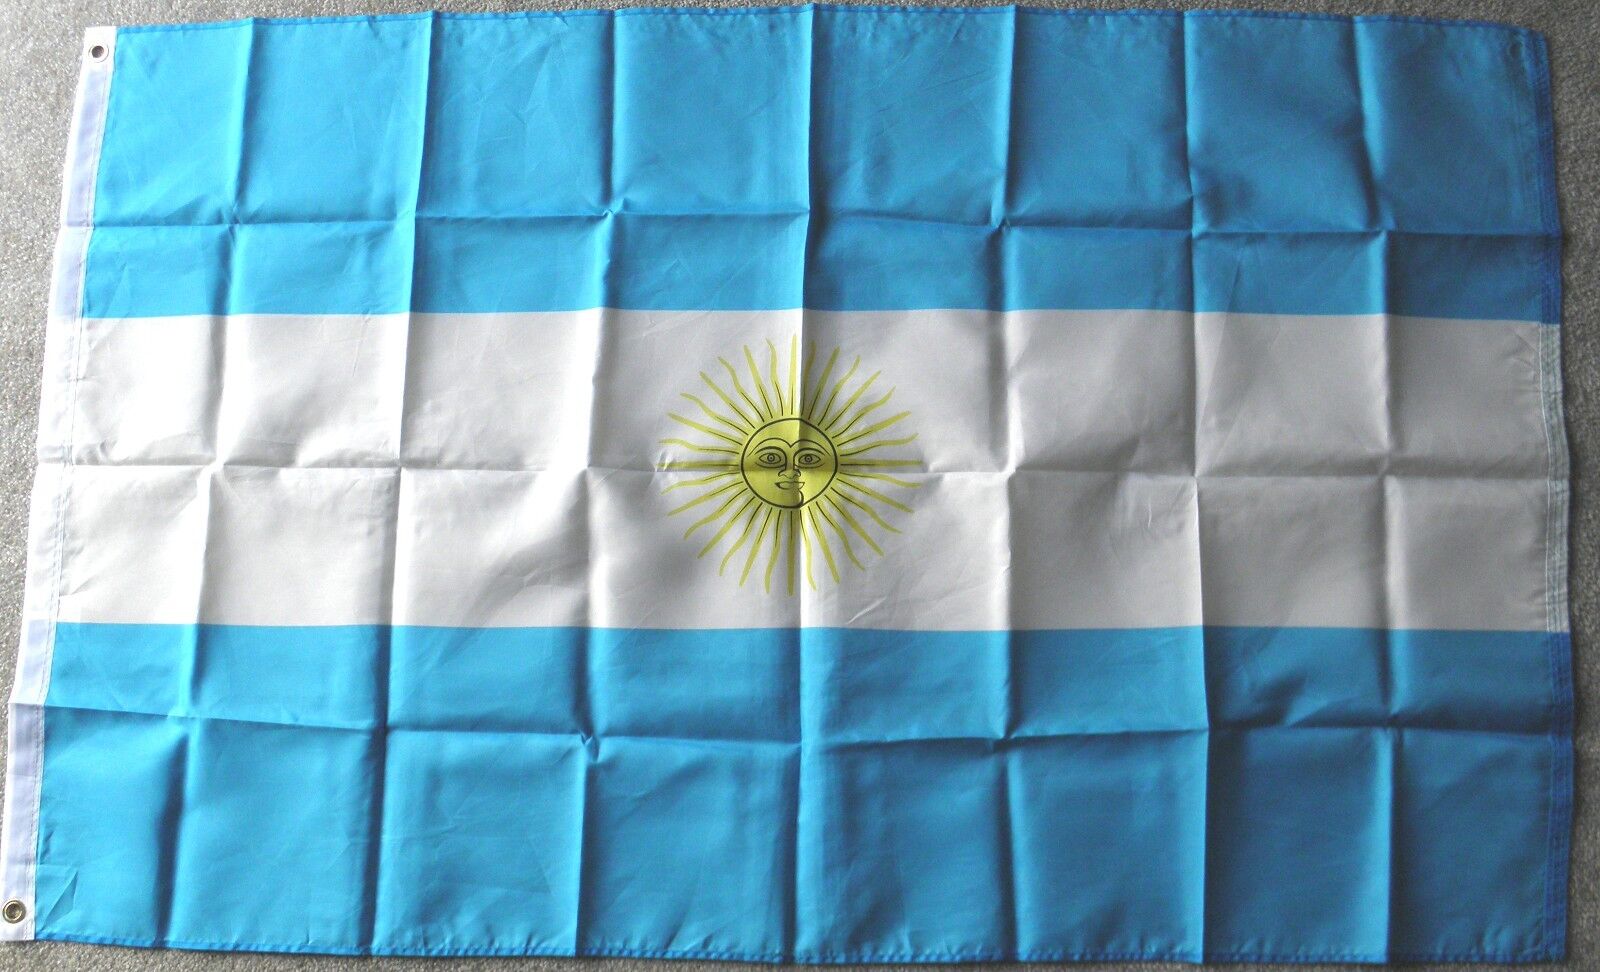 ARGENTINA ARGENTINIAN STATE INTERNATIONAL COUNTRY POLYESTER FLAG 3 X 5 FEET